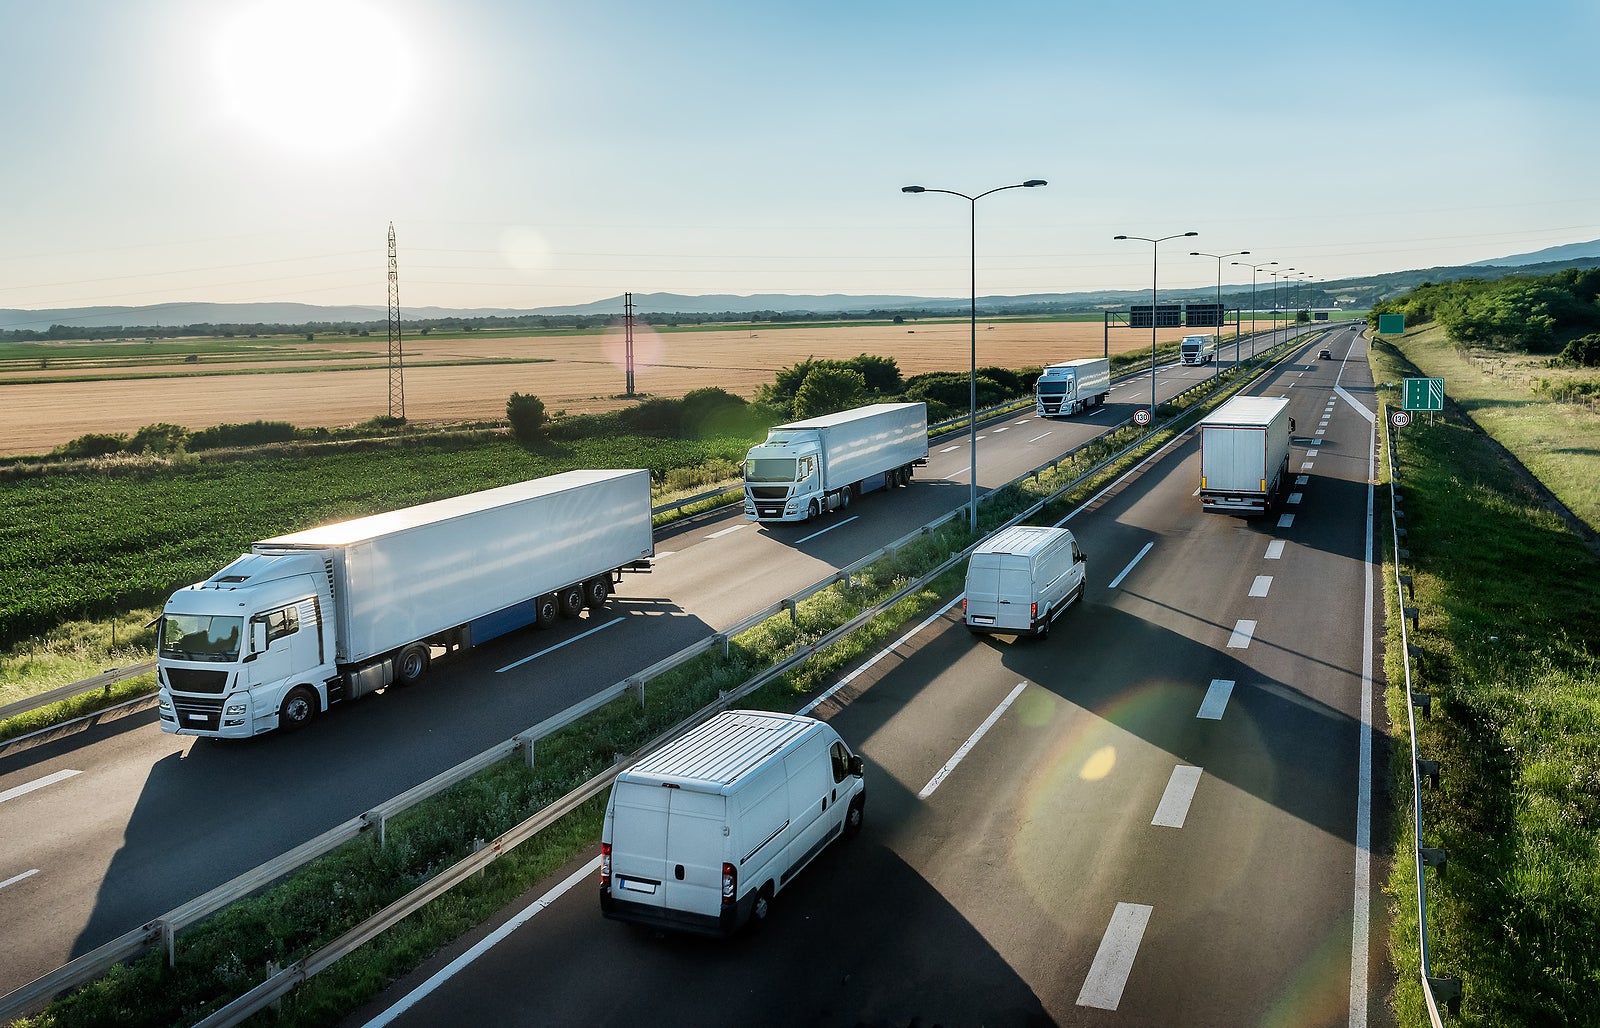 Convoy or caravans of transportation trucks passing vans and truck on a highway on a bright blue day. Highway transit transportation with lorry trucks and vans